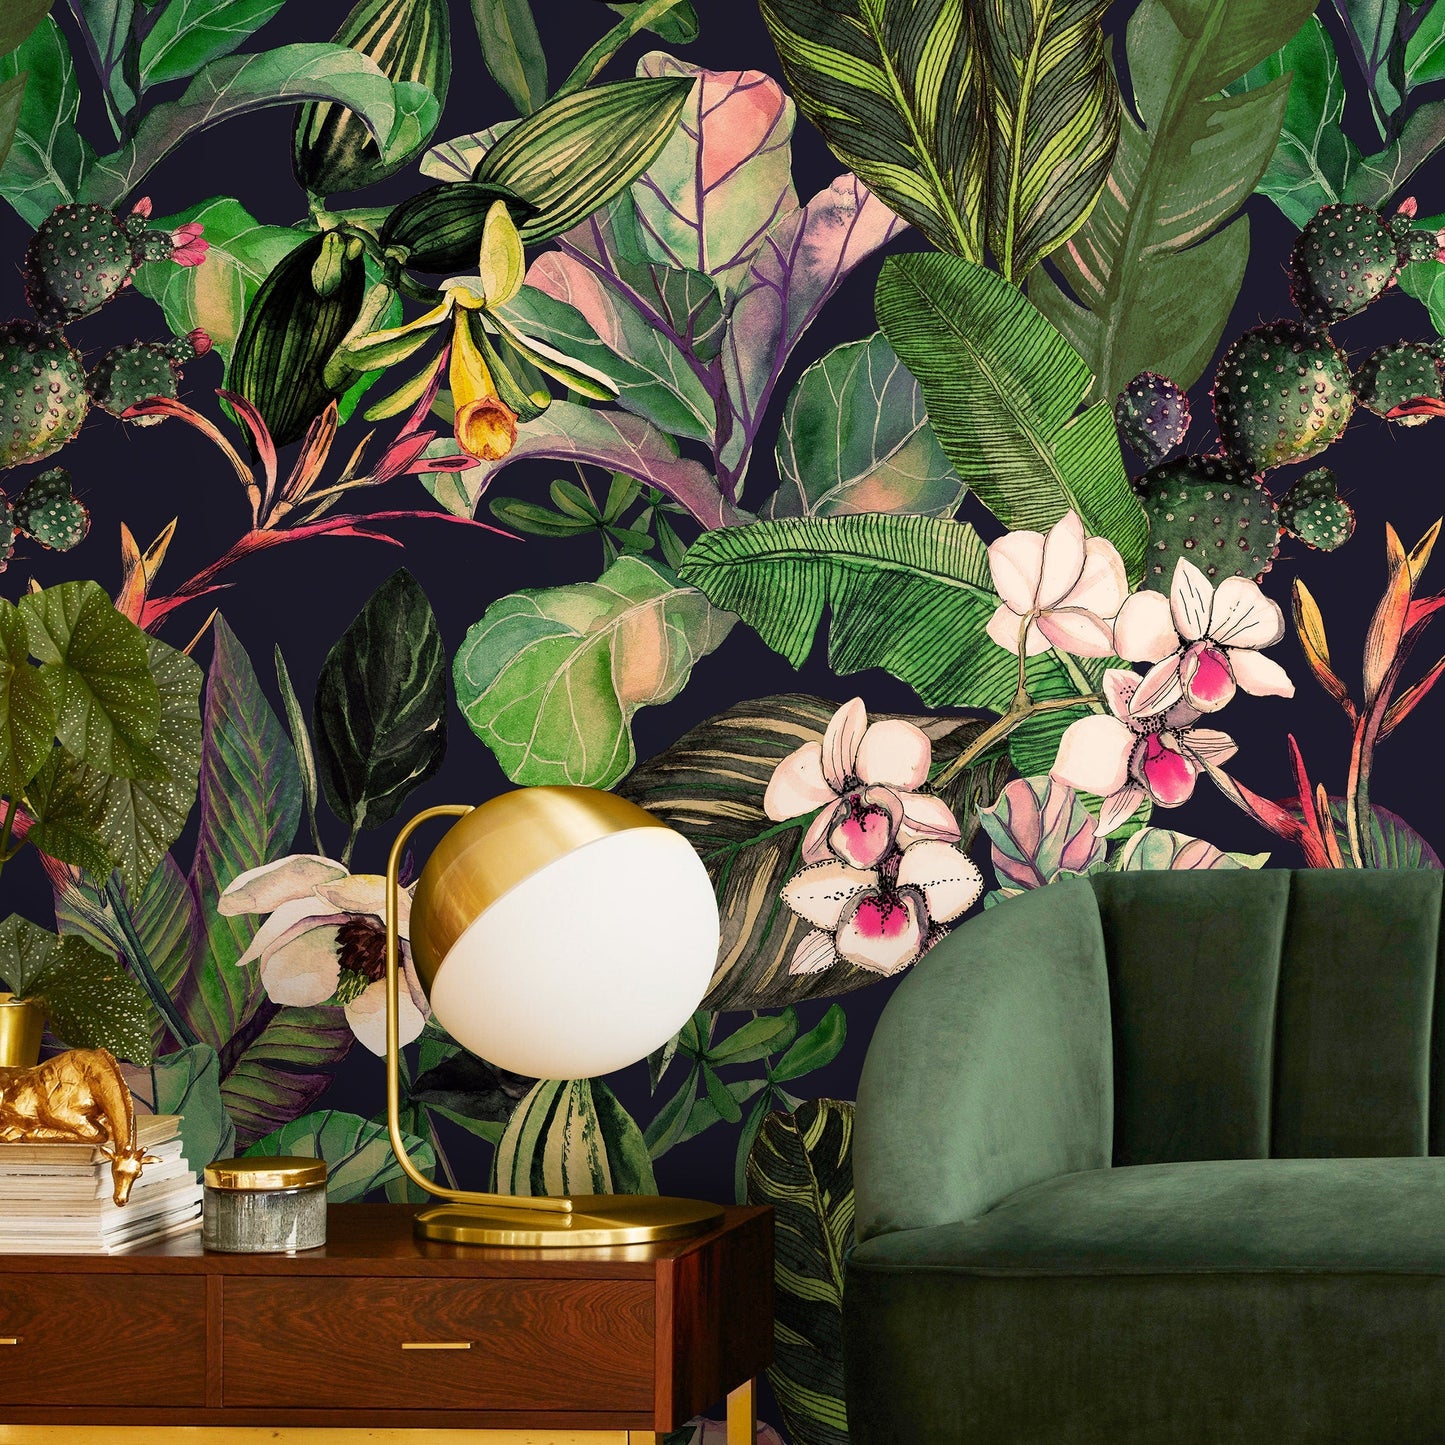 Removable Wallpaper Peel and Stick Wallpaper Wall Paper Wall Mural - Tropical Wallpaper - A470